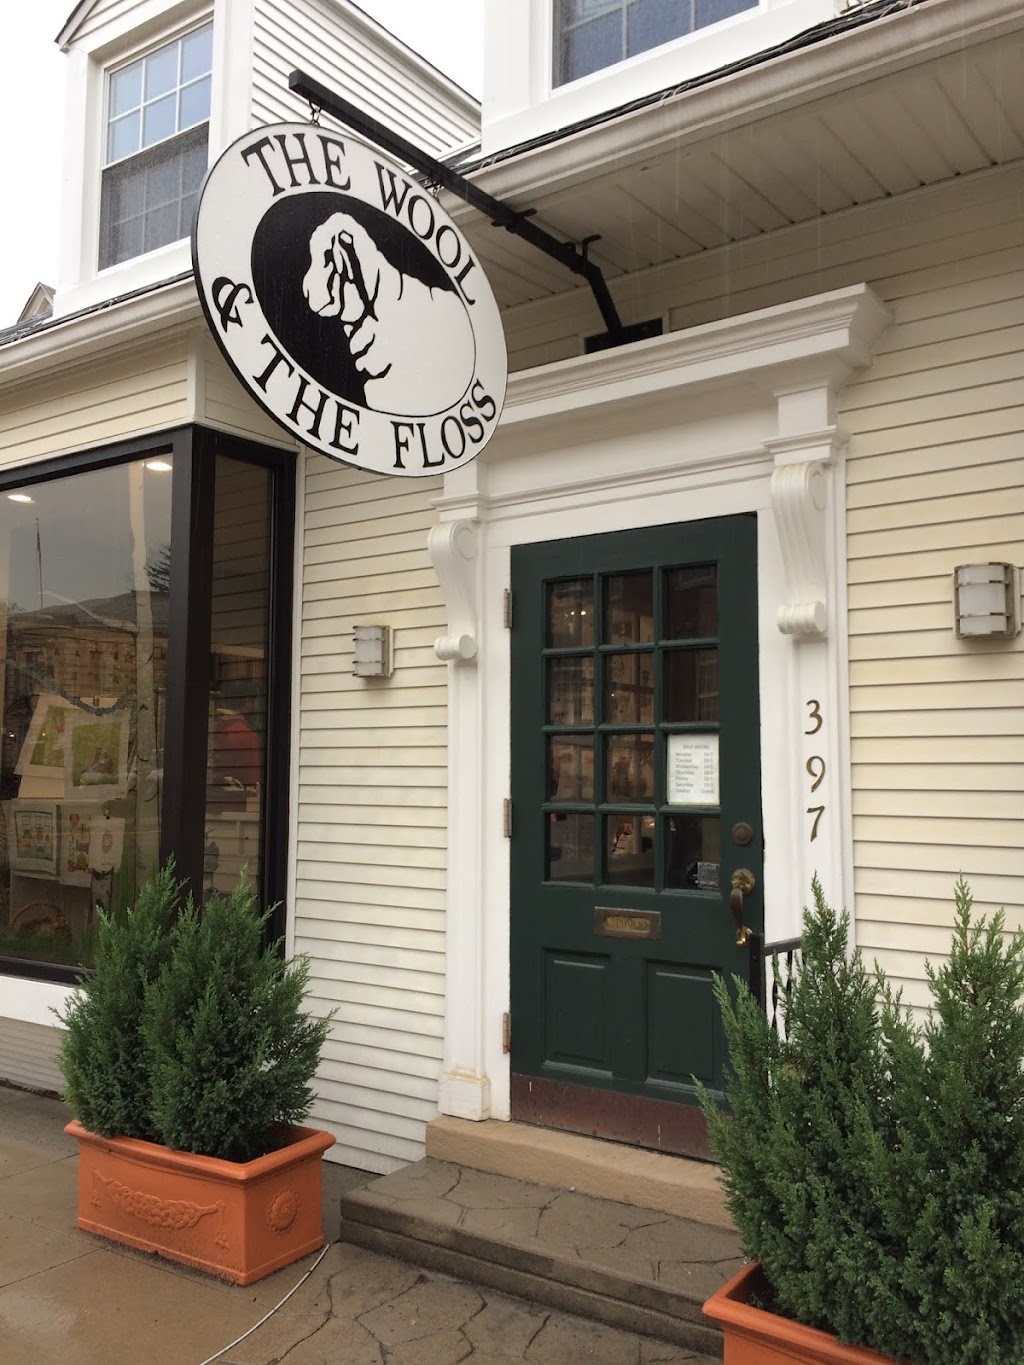 Wool & the Floss | 397 Fisher Rd, Grosse Pointe, MI 48230, USA | Phone: (313) 882-9110